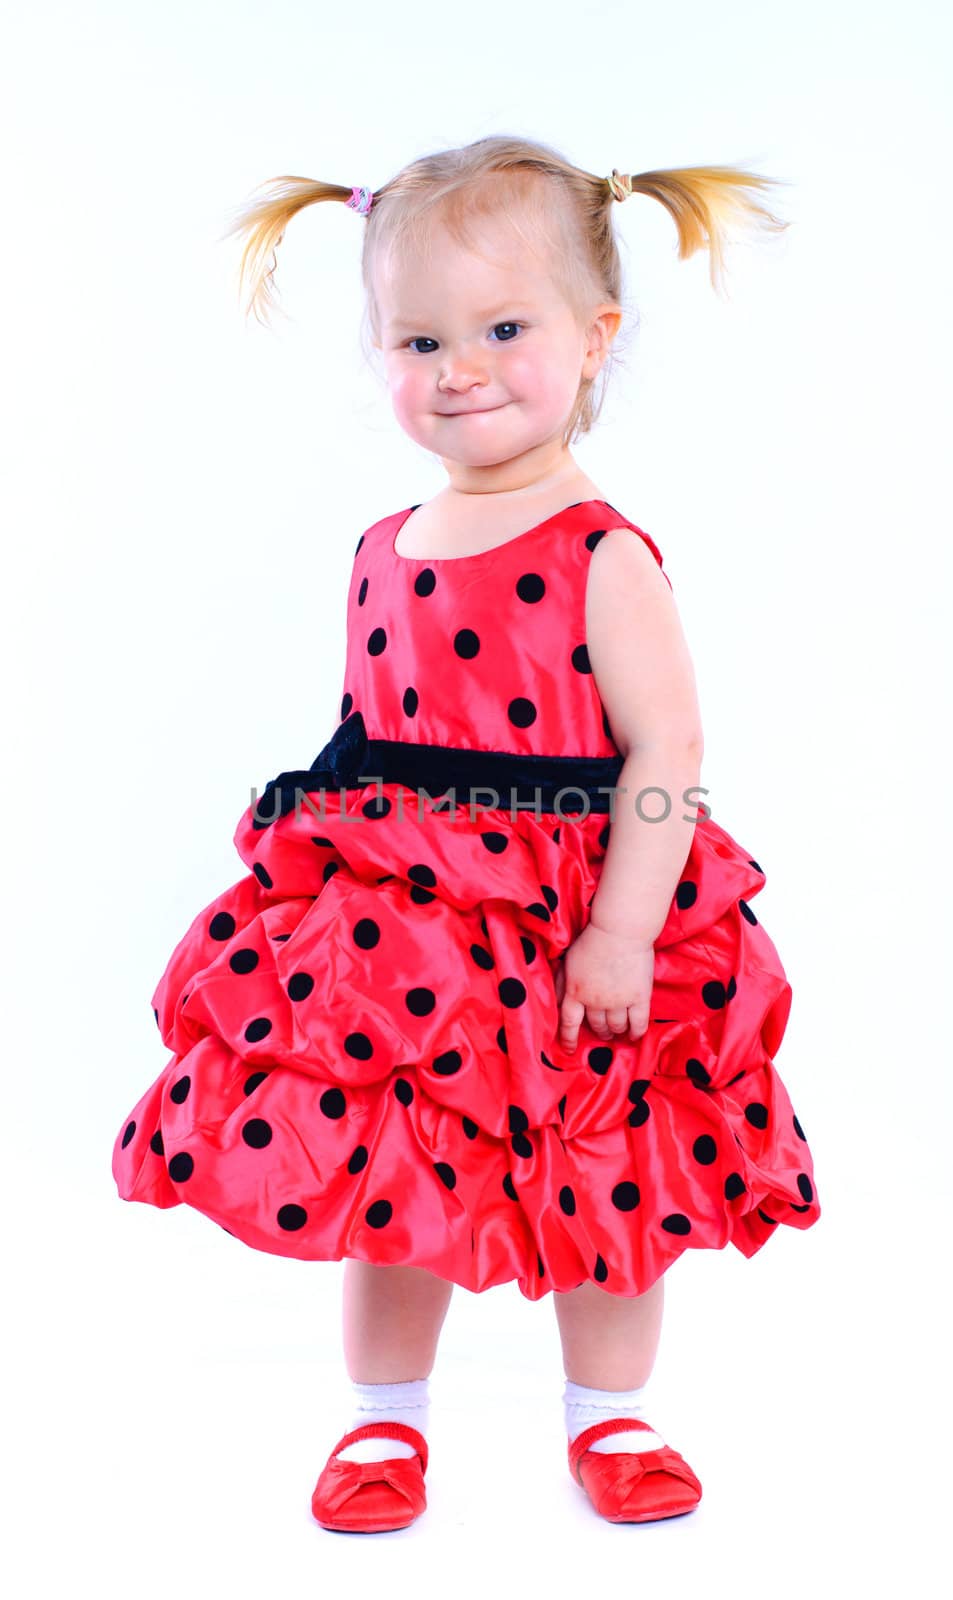 Cute little baby girl in a red dress. In the studio. Isolated